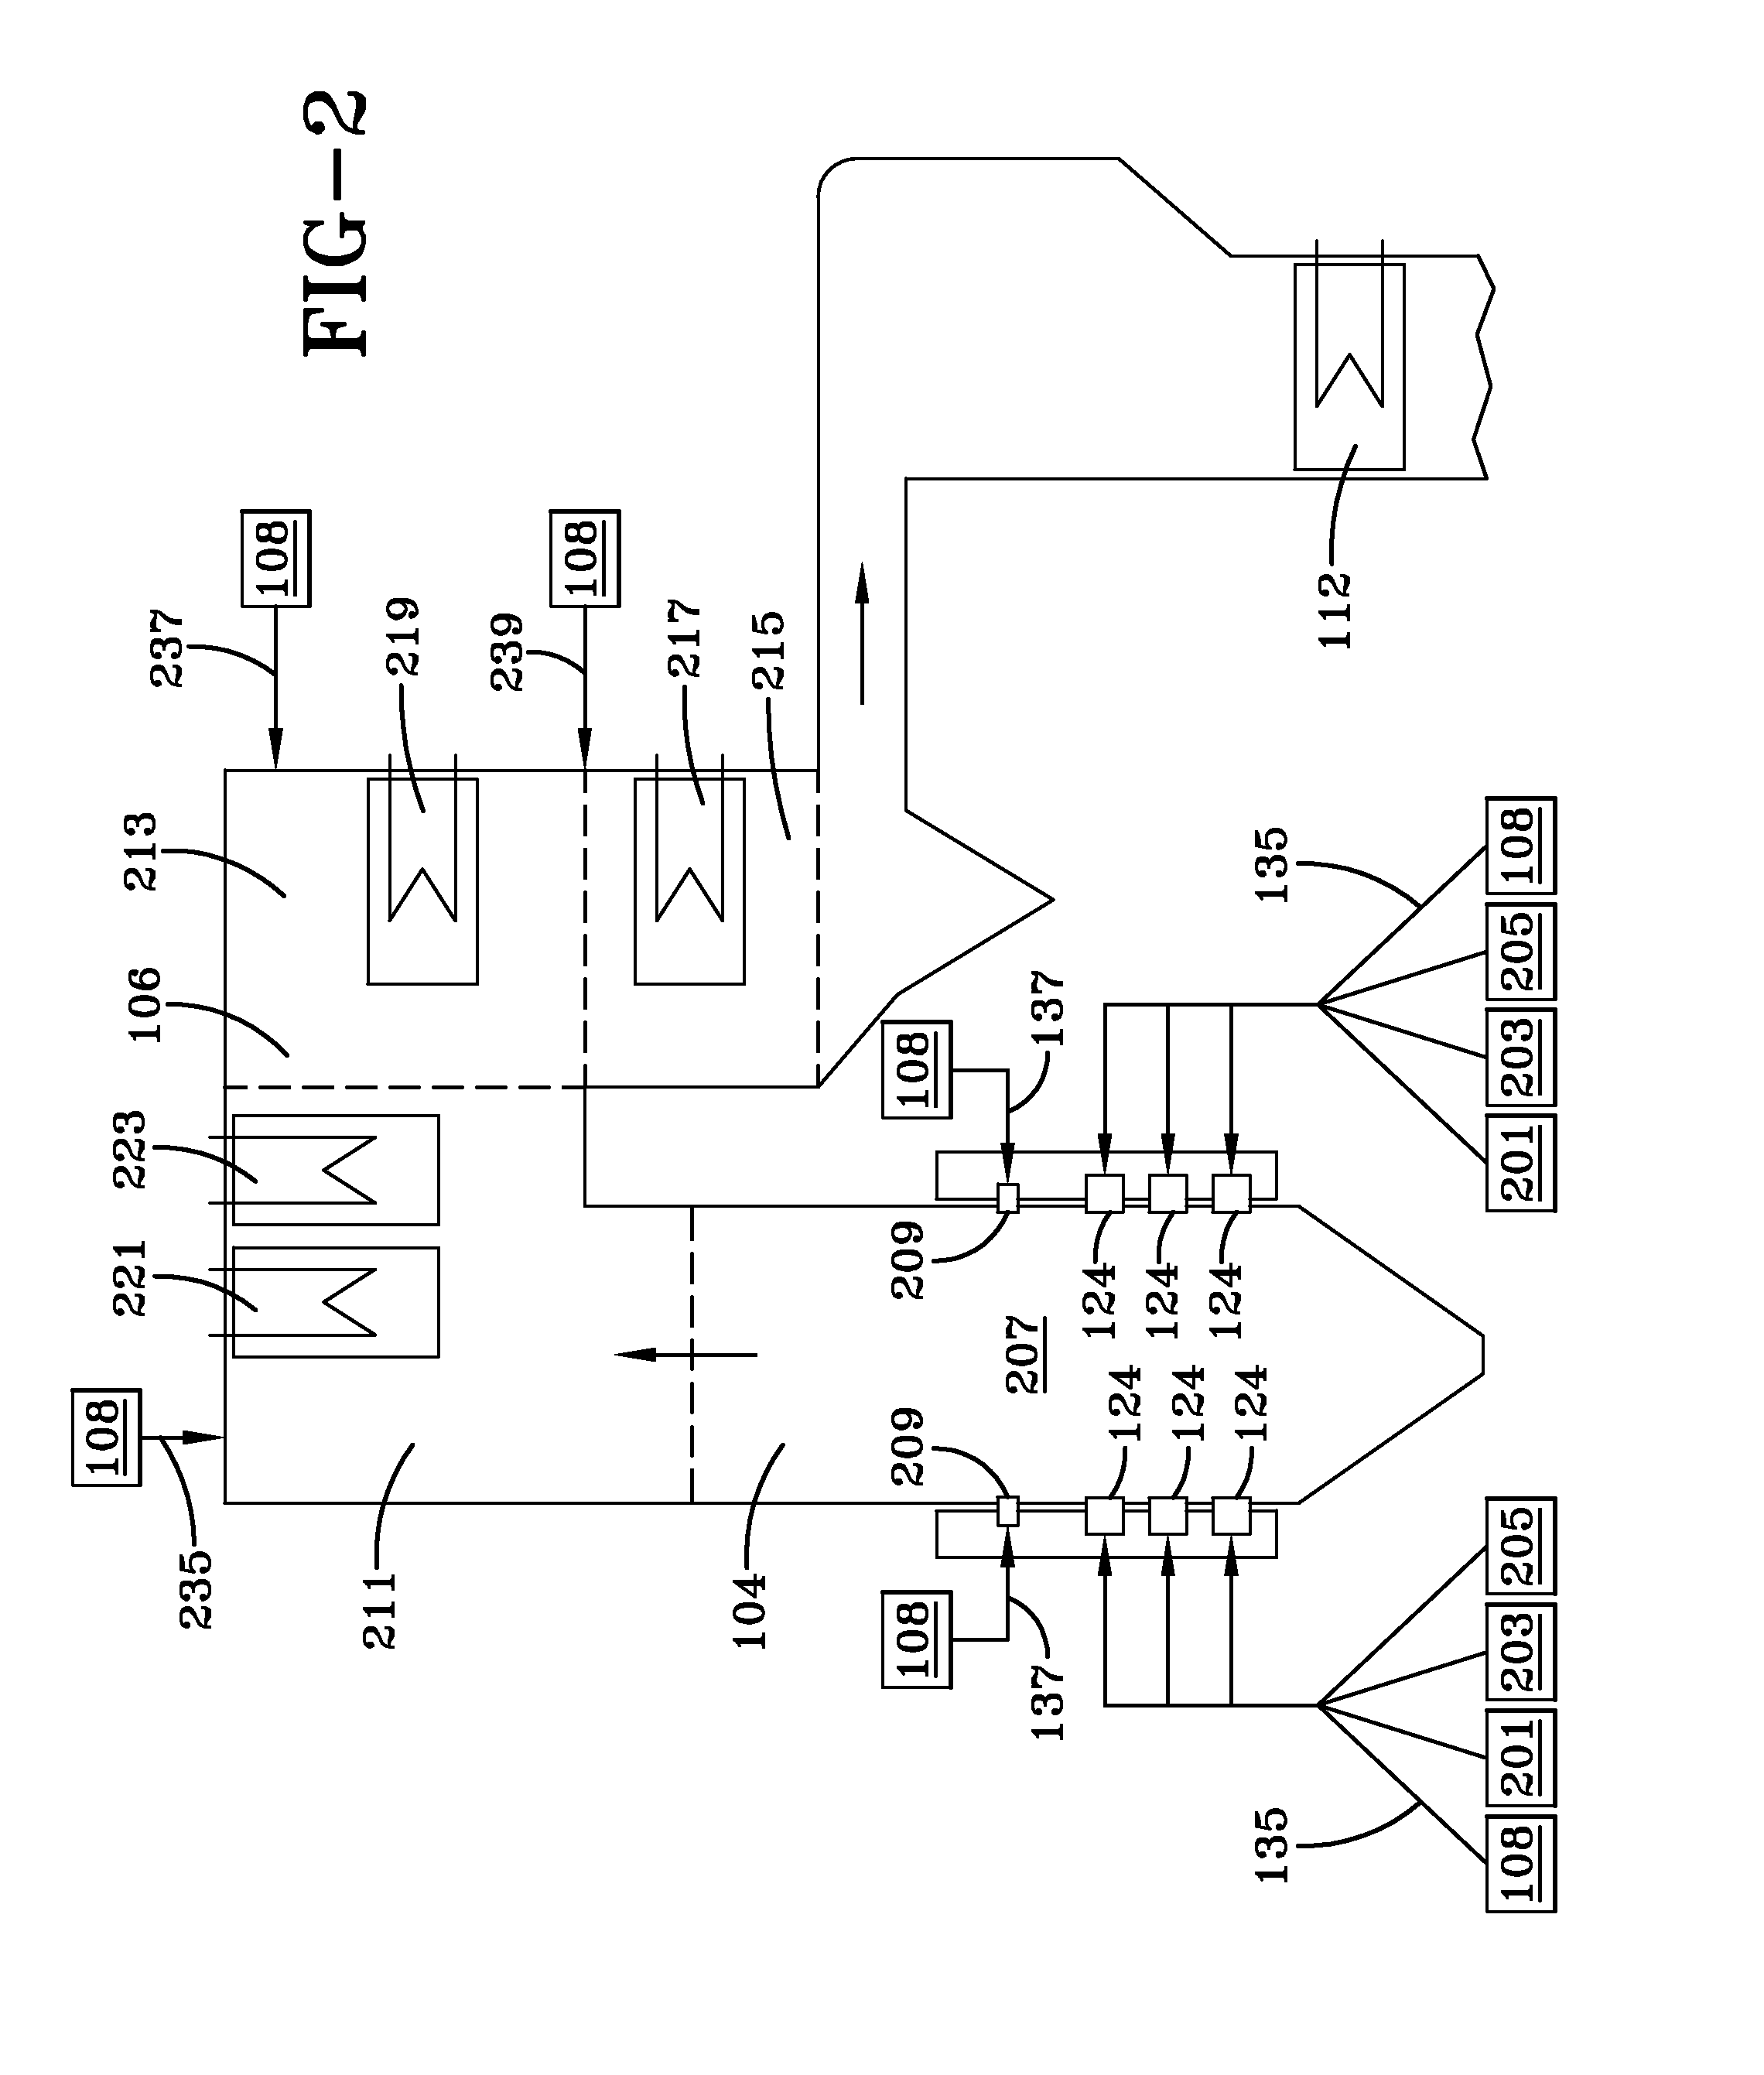 Combustion system with steam or water injection